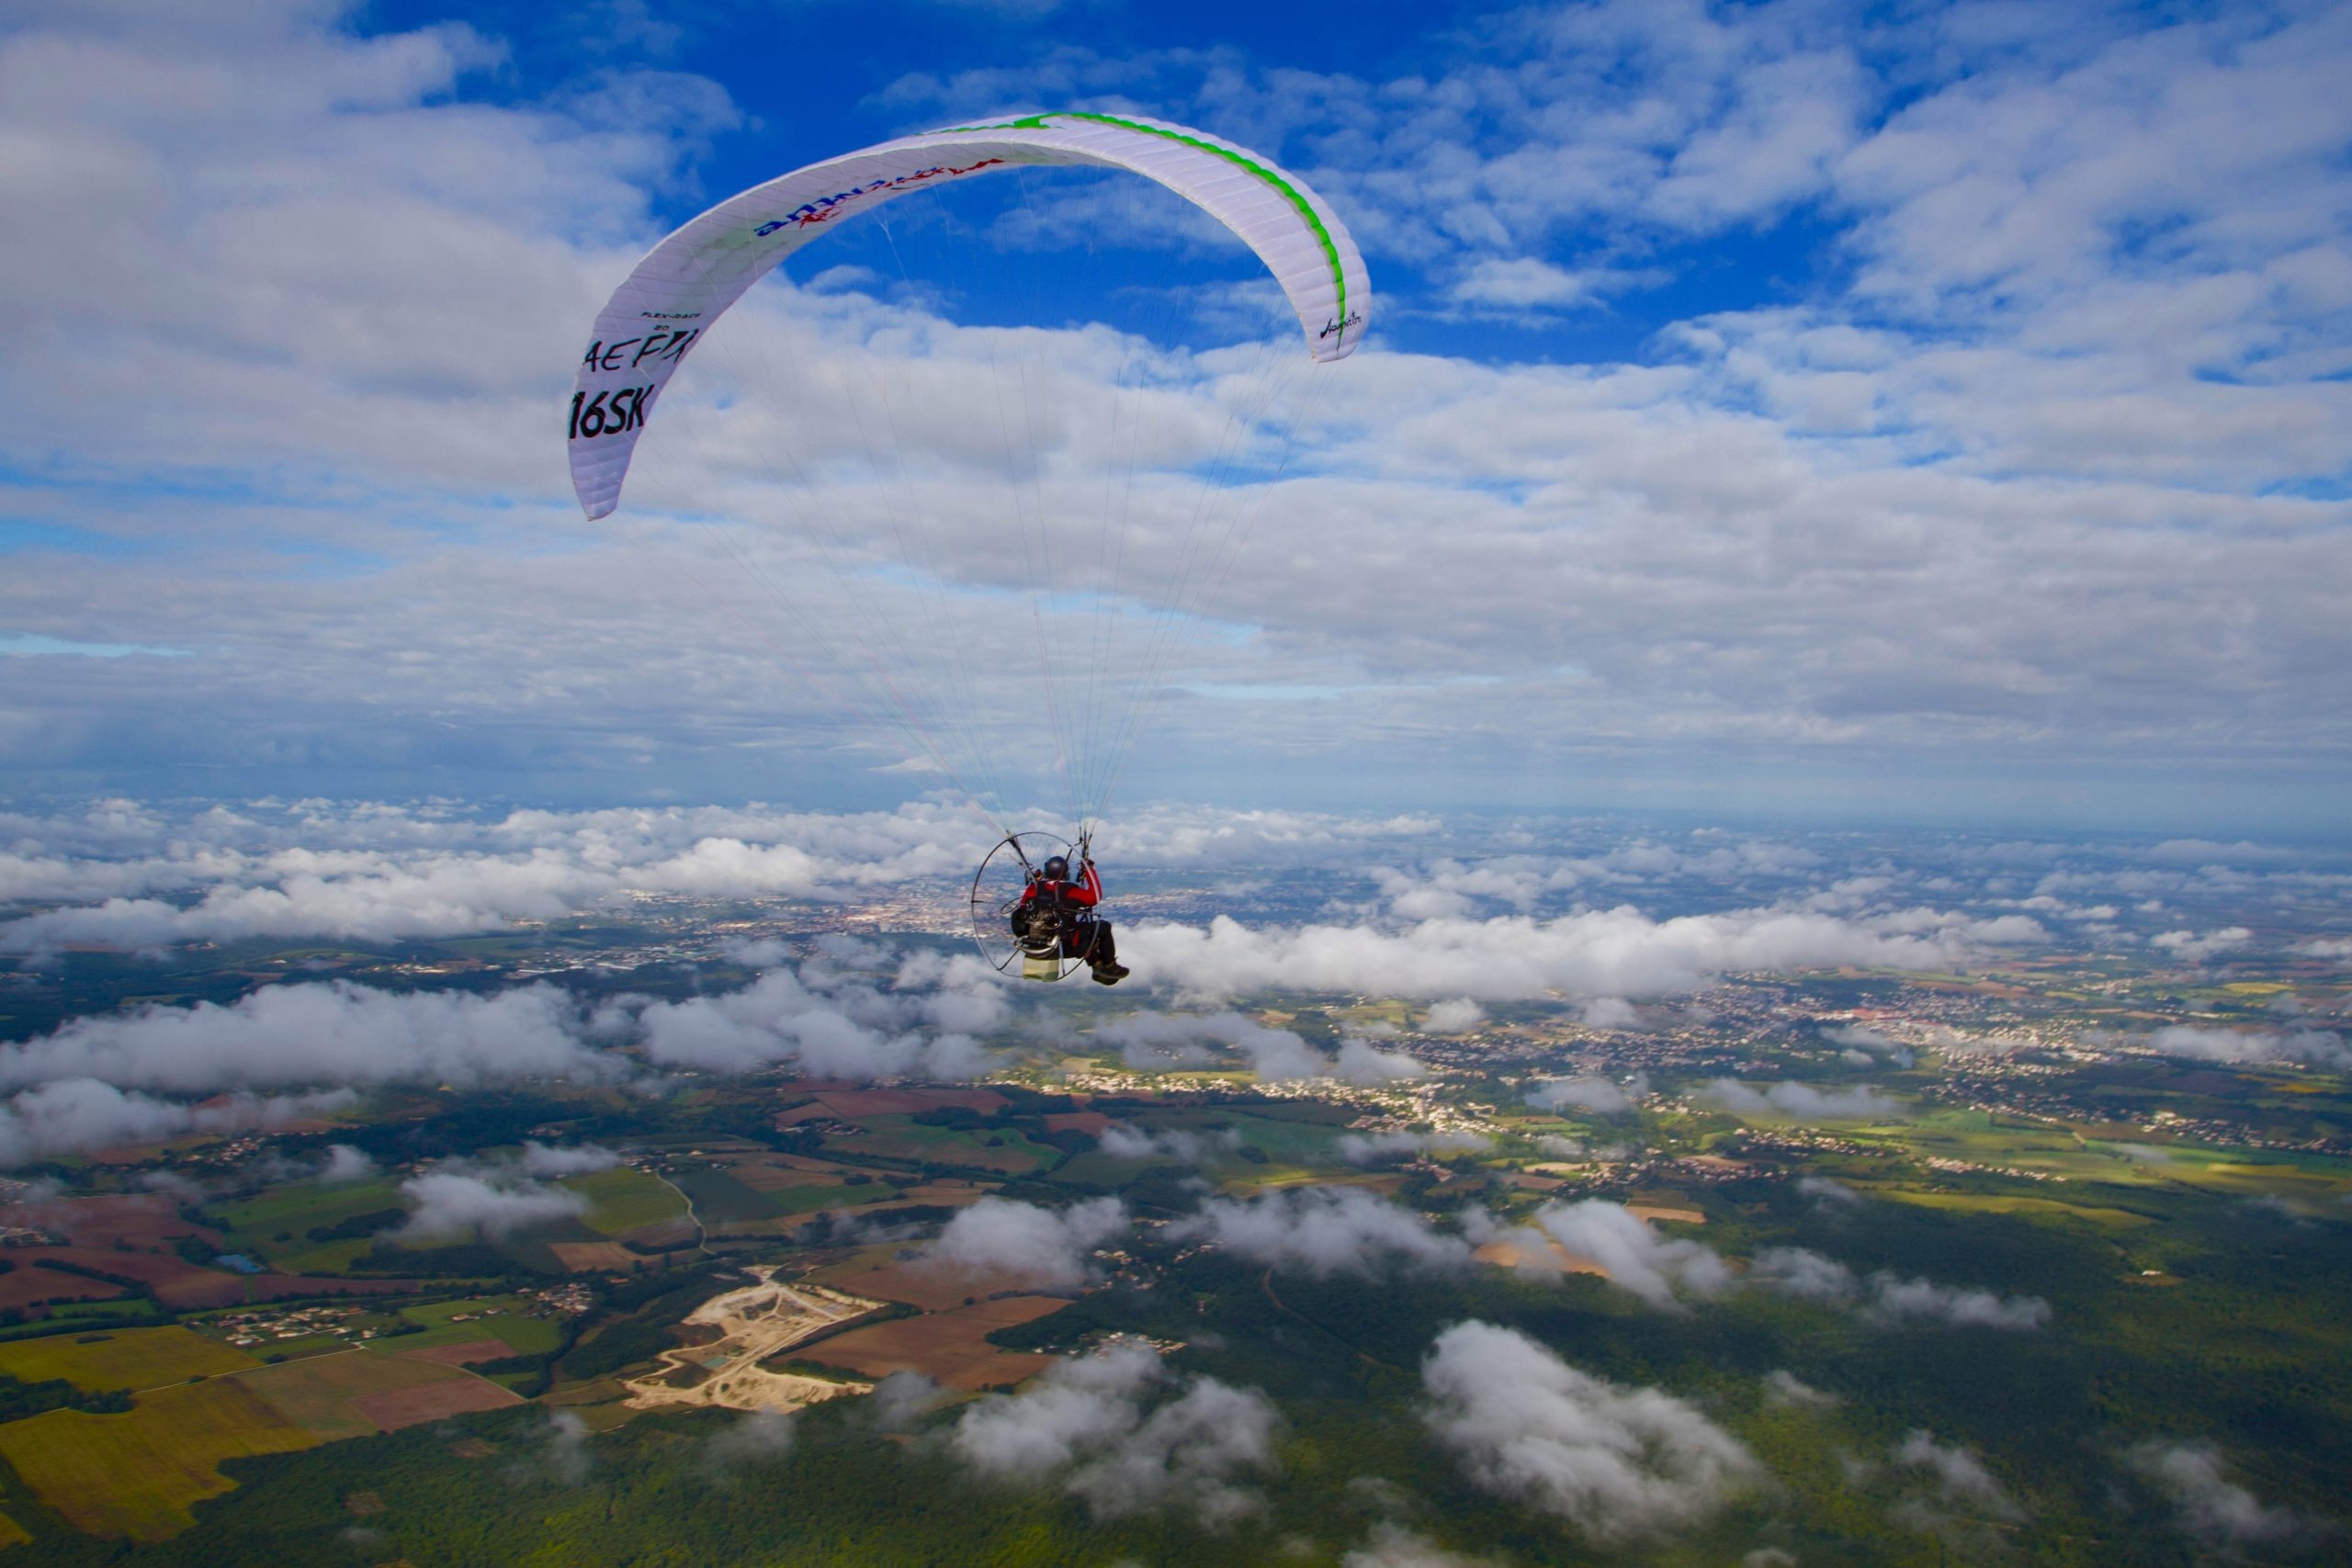 Paramotoring: Powered Paraglider, Easy flying characteristics of a paraglider with the autonomy and range of powered flight. 2560x1710 HD Background.